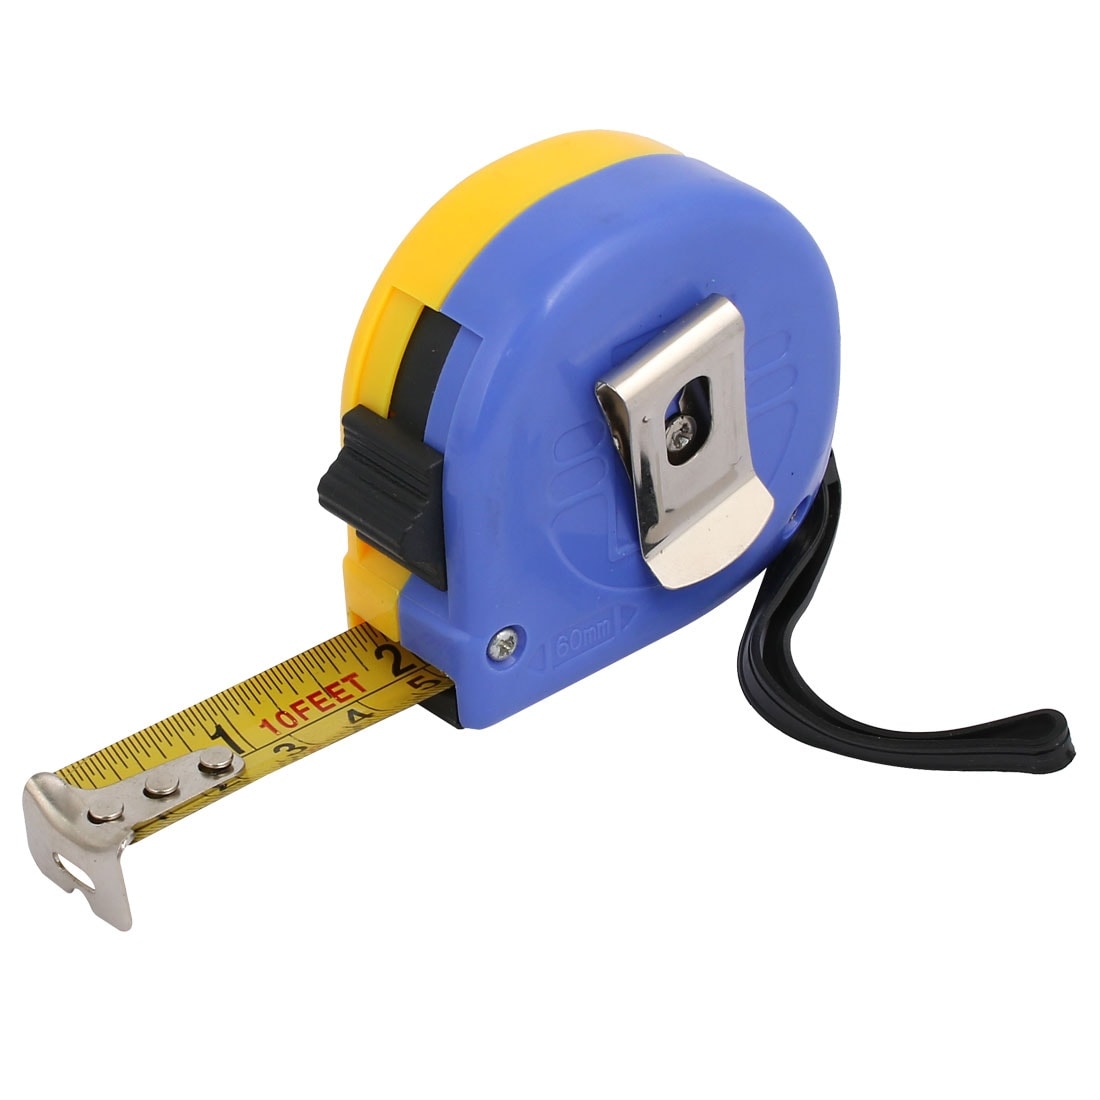 Battat – Toy Measuring Tape – Working Reel & Easy-Hold Handle – Tool  Discovery Carousel – Metric & Imperial Units – 2 Years + – Big Tape Measure